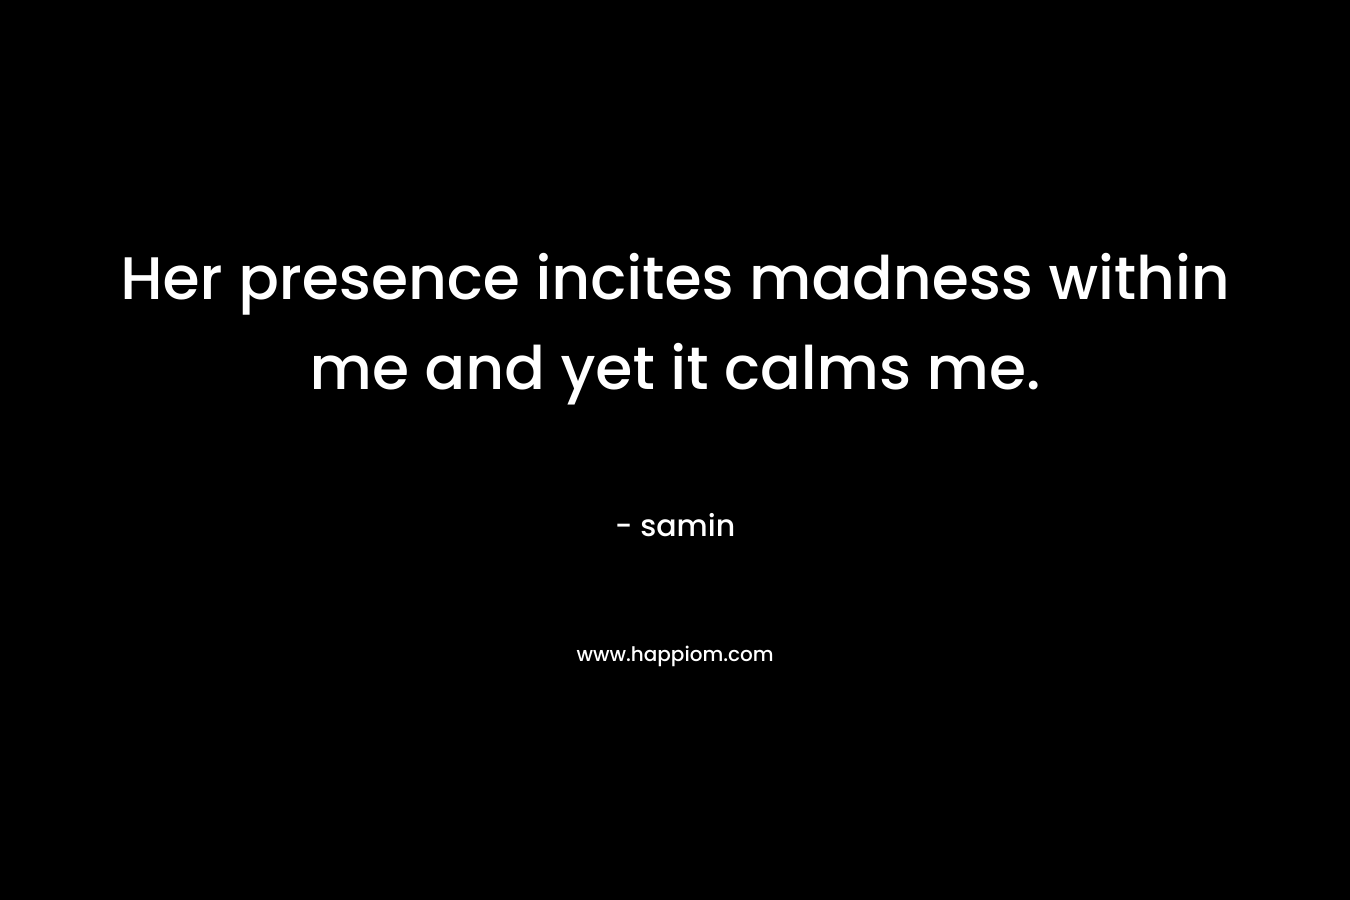 Her presence incites madness within me and yet it calms me. – samin